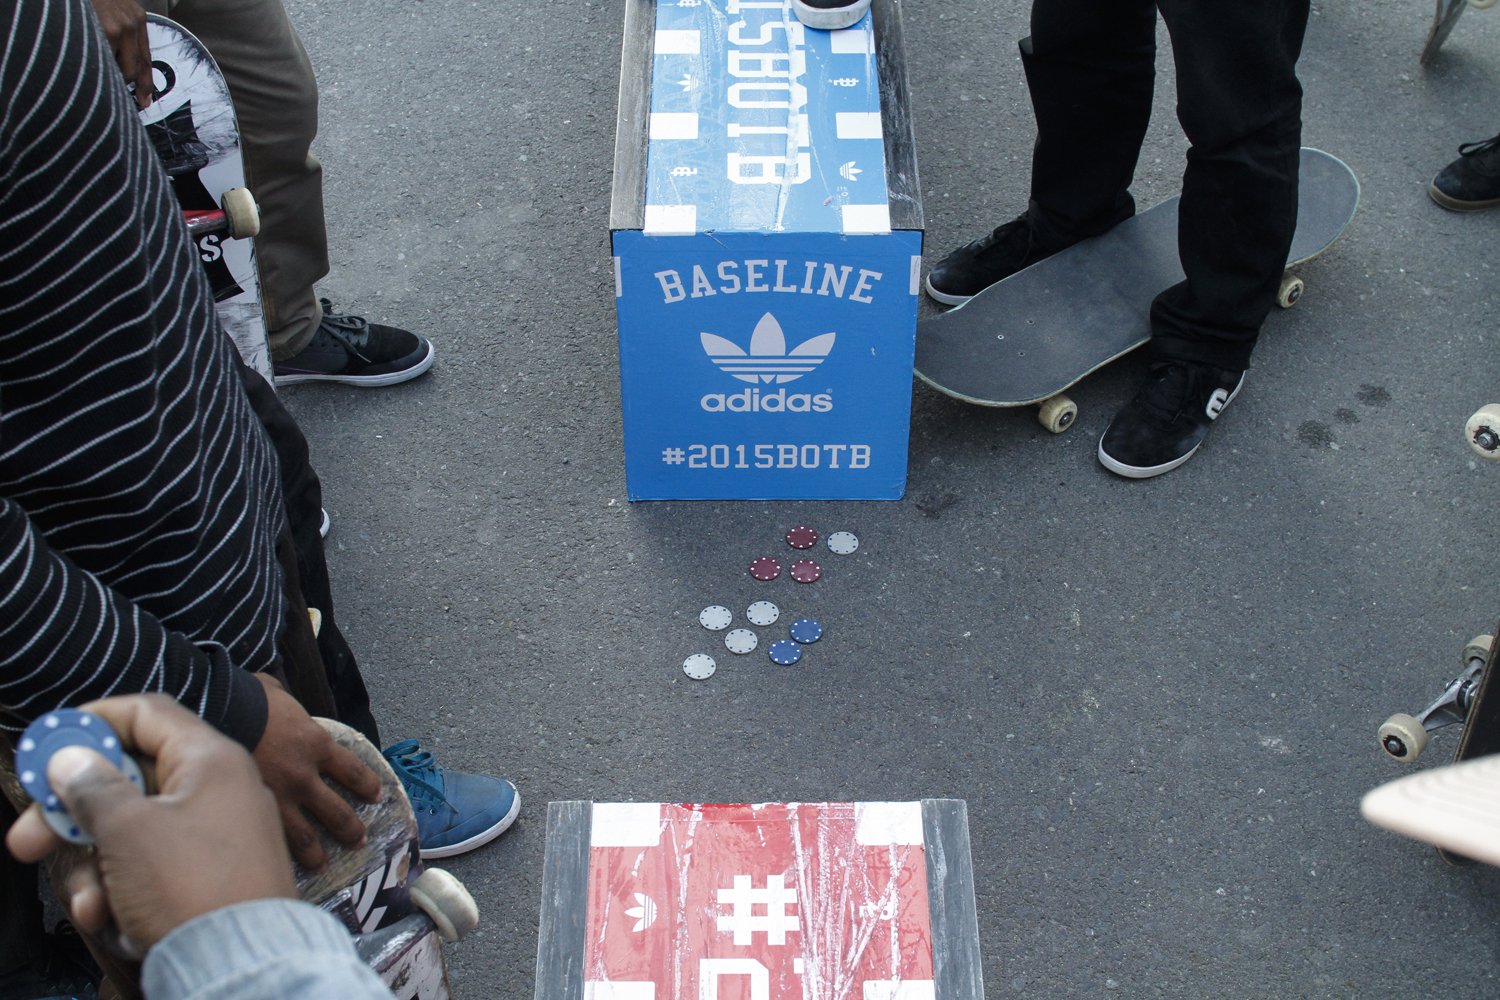 adidas BOTB 2015 Chips on the ground